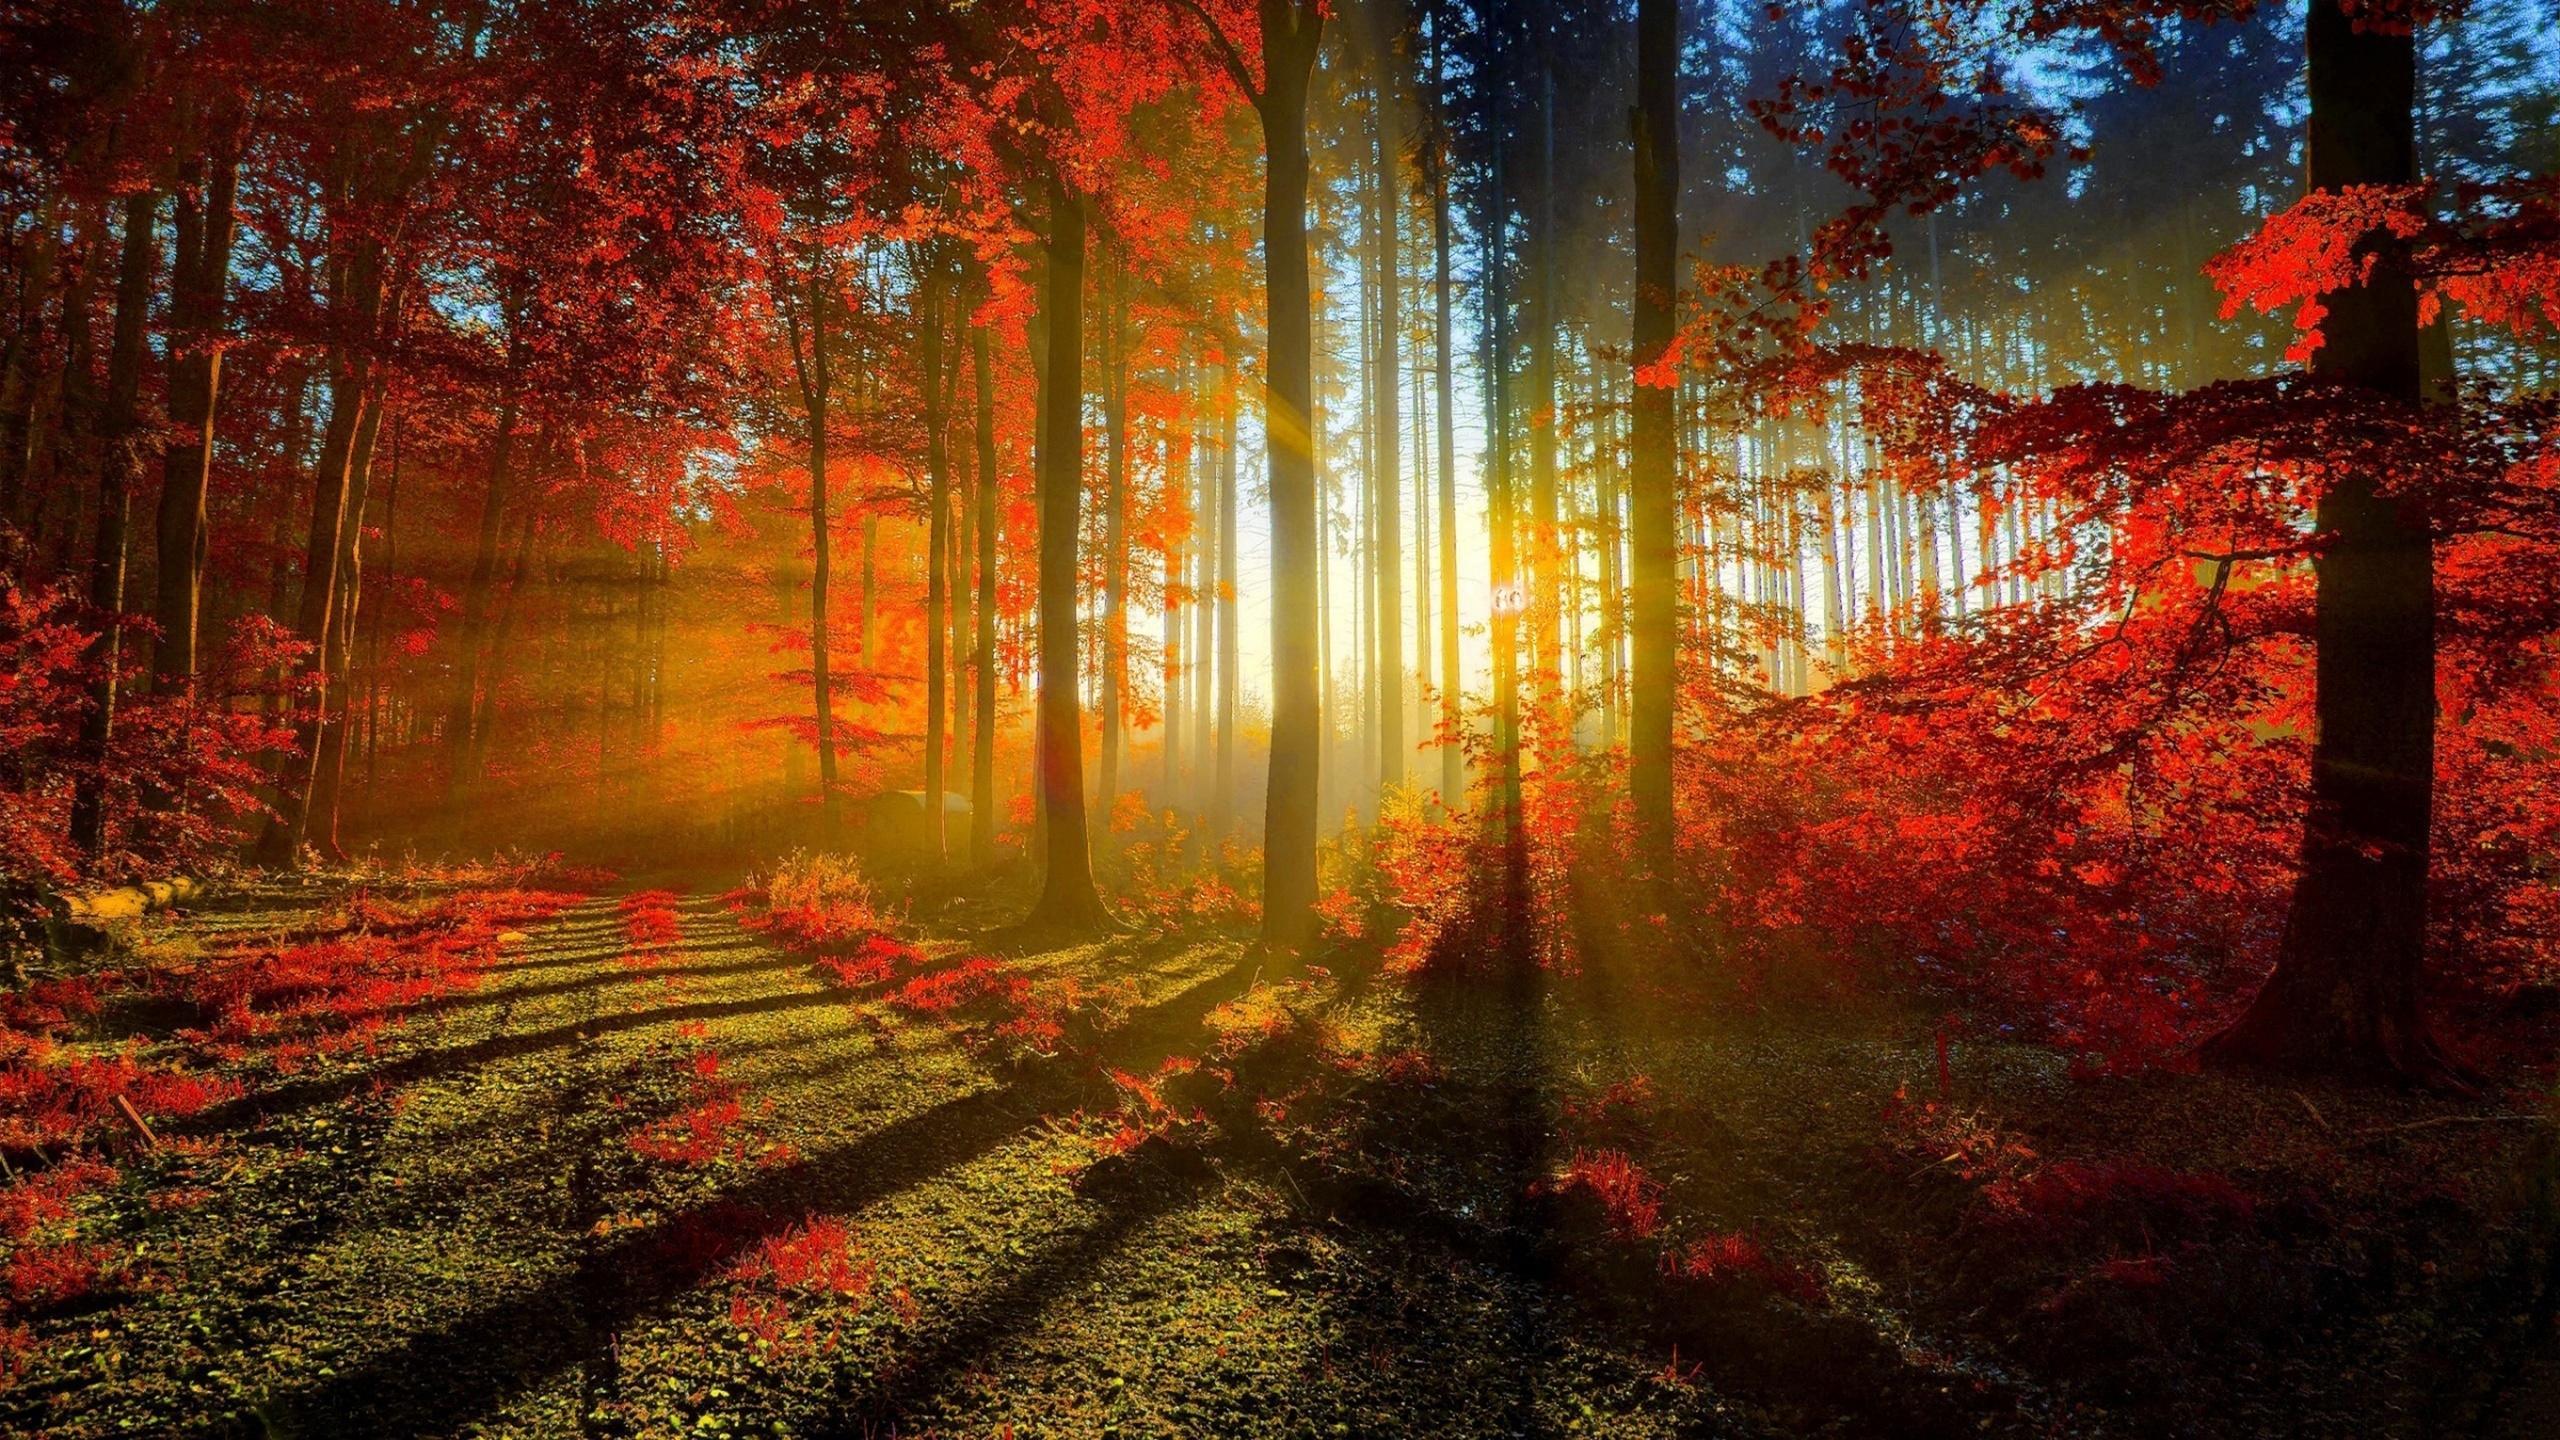 Download 2560x1440 Autumn, Sunrays, Trees, Forest, Fall Wallpaper for iMac 27 inch